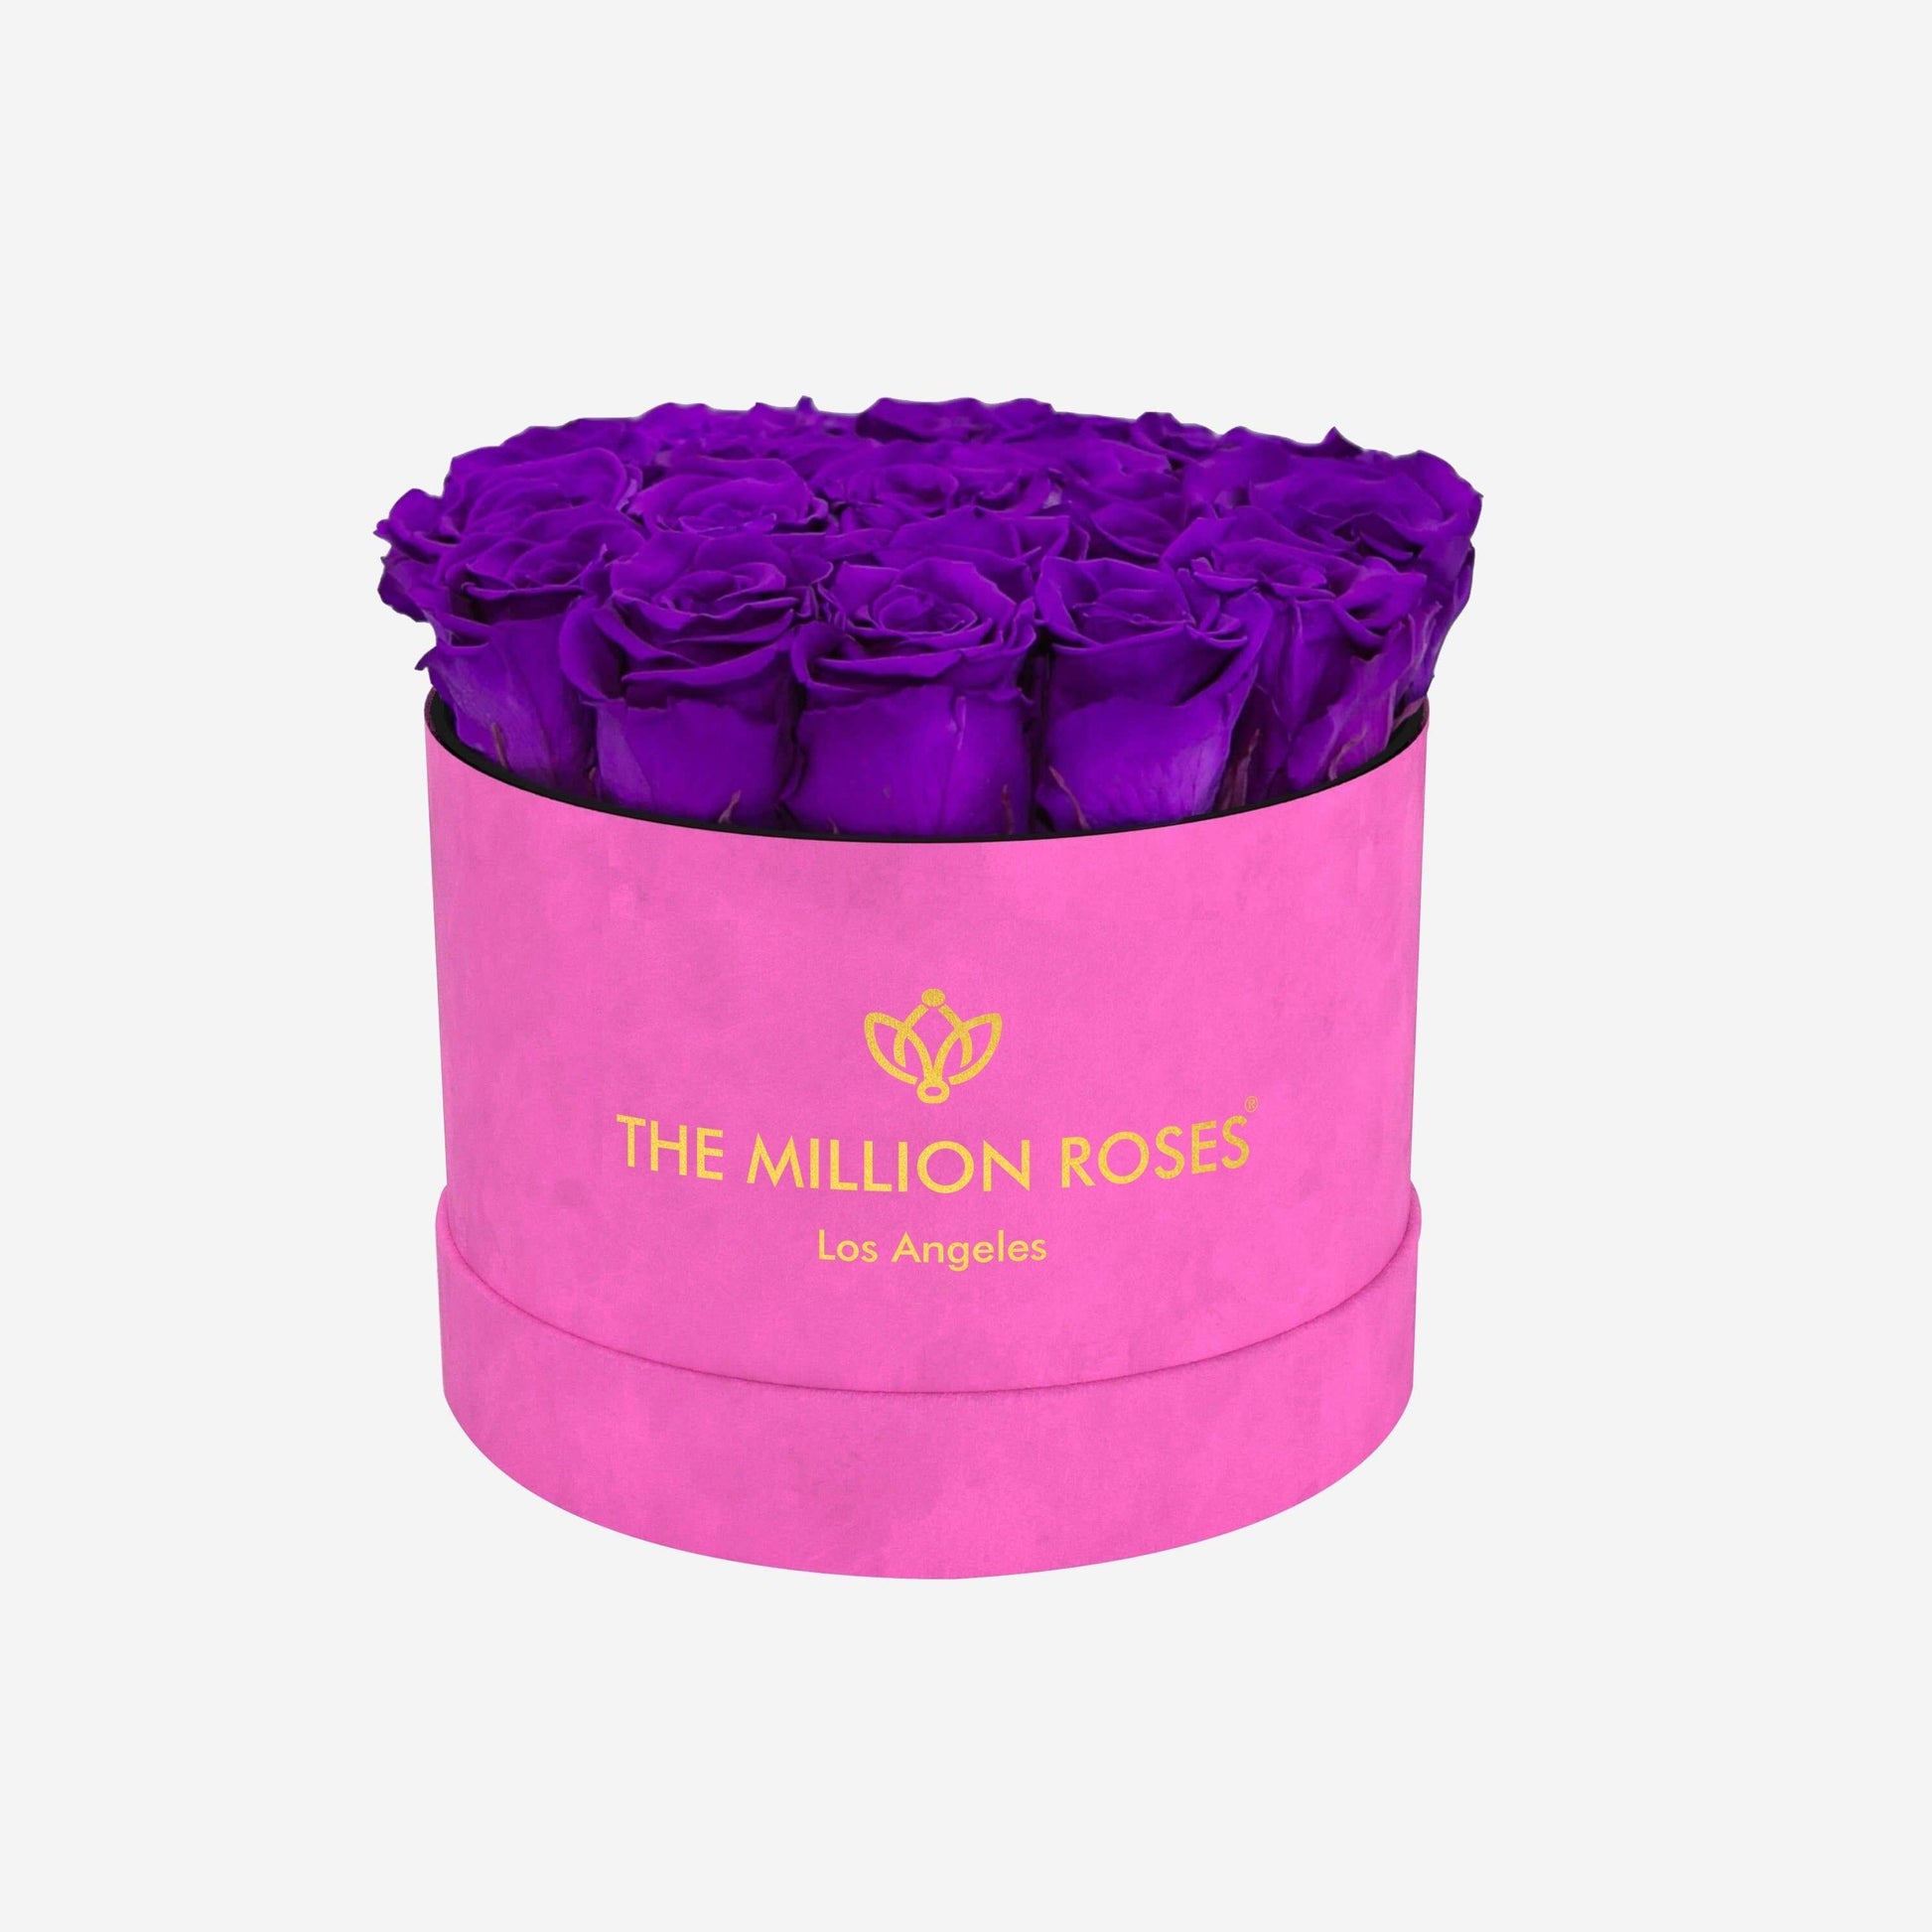 Classic Hot Pink Suede Box | Bright Purple Roses - The Million Roses